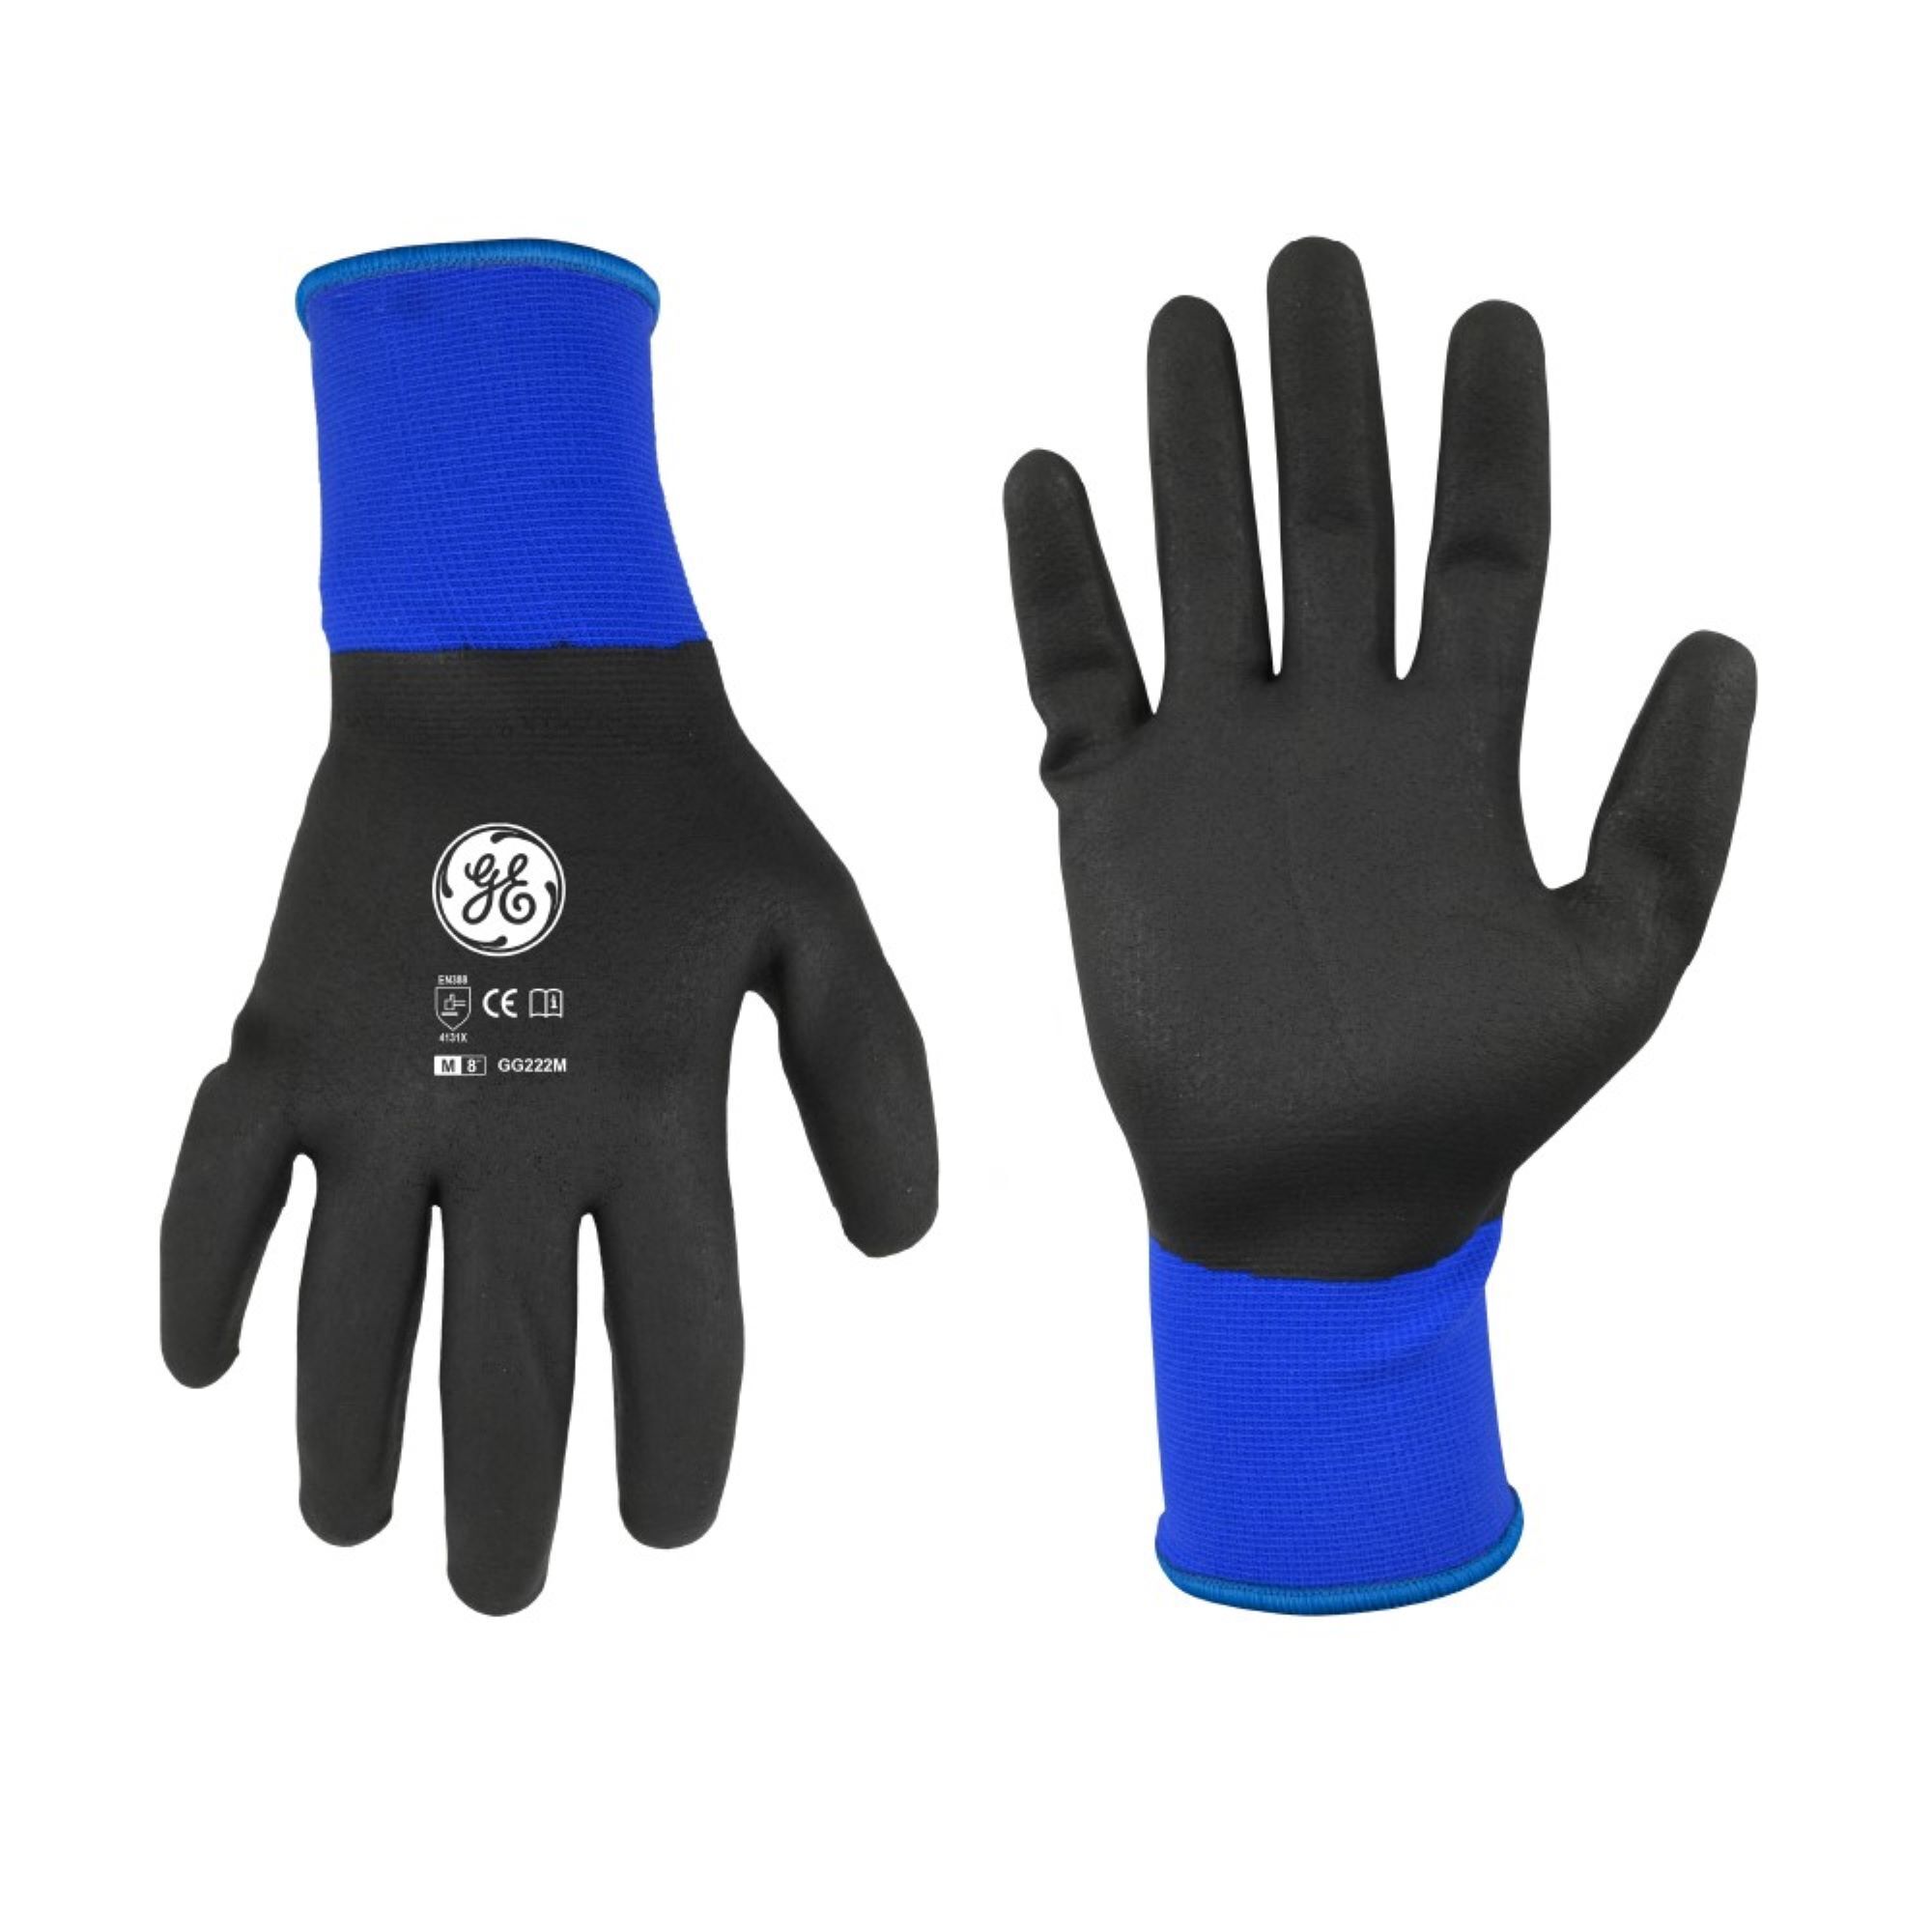 General Electric, M Foam Nitrile Black/Blue Dipped Gloves 12 pair, Size M, Included (qty.) 12, Model GG222M